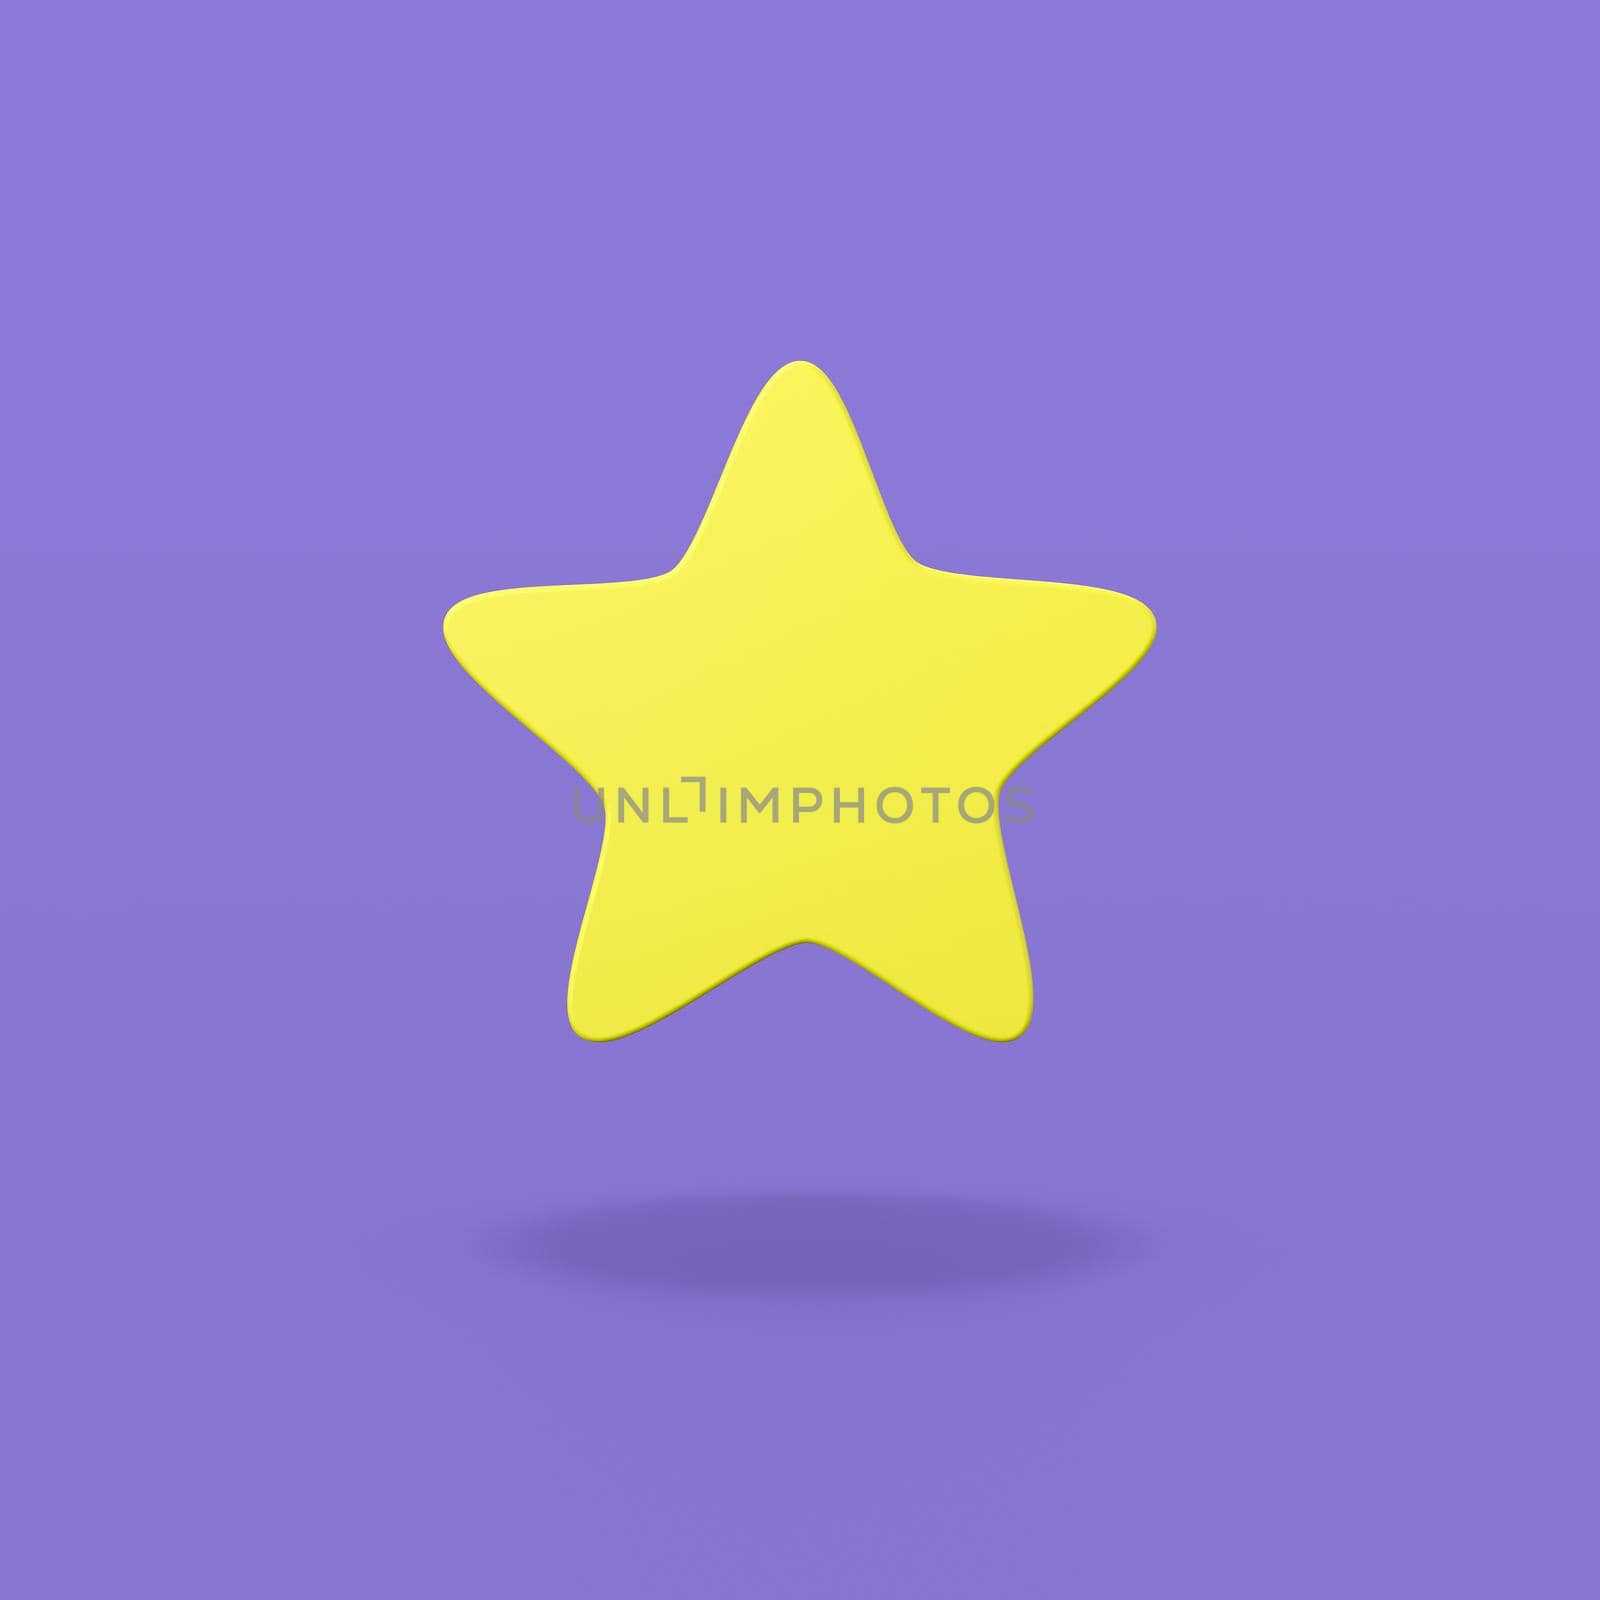 One Single Yellow Star Shape on Flat Purple Background with Shadow 3D Illustration